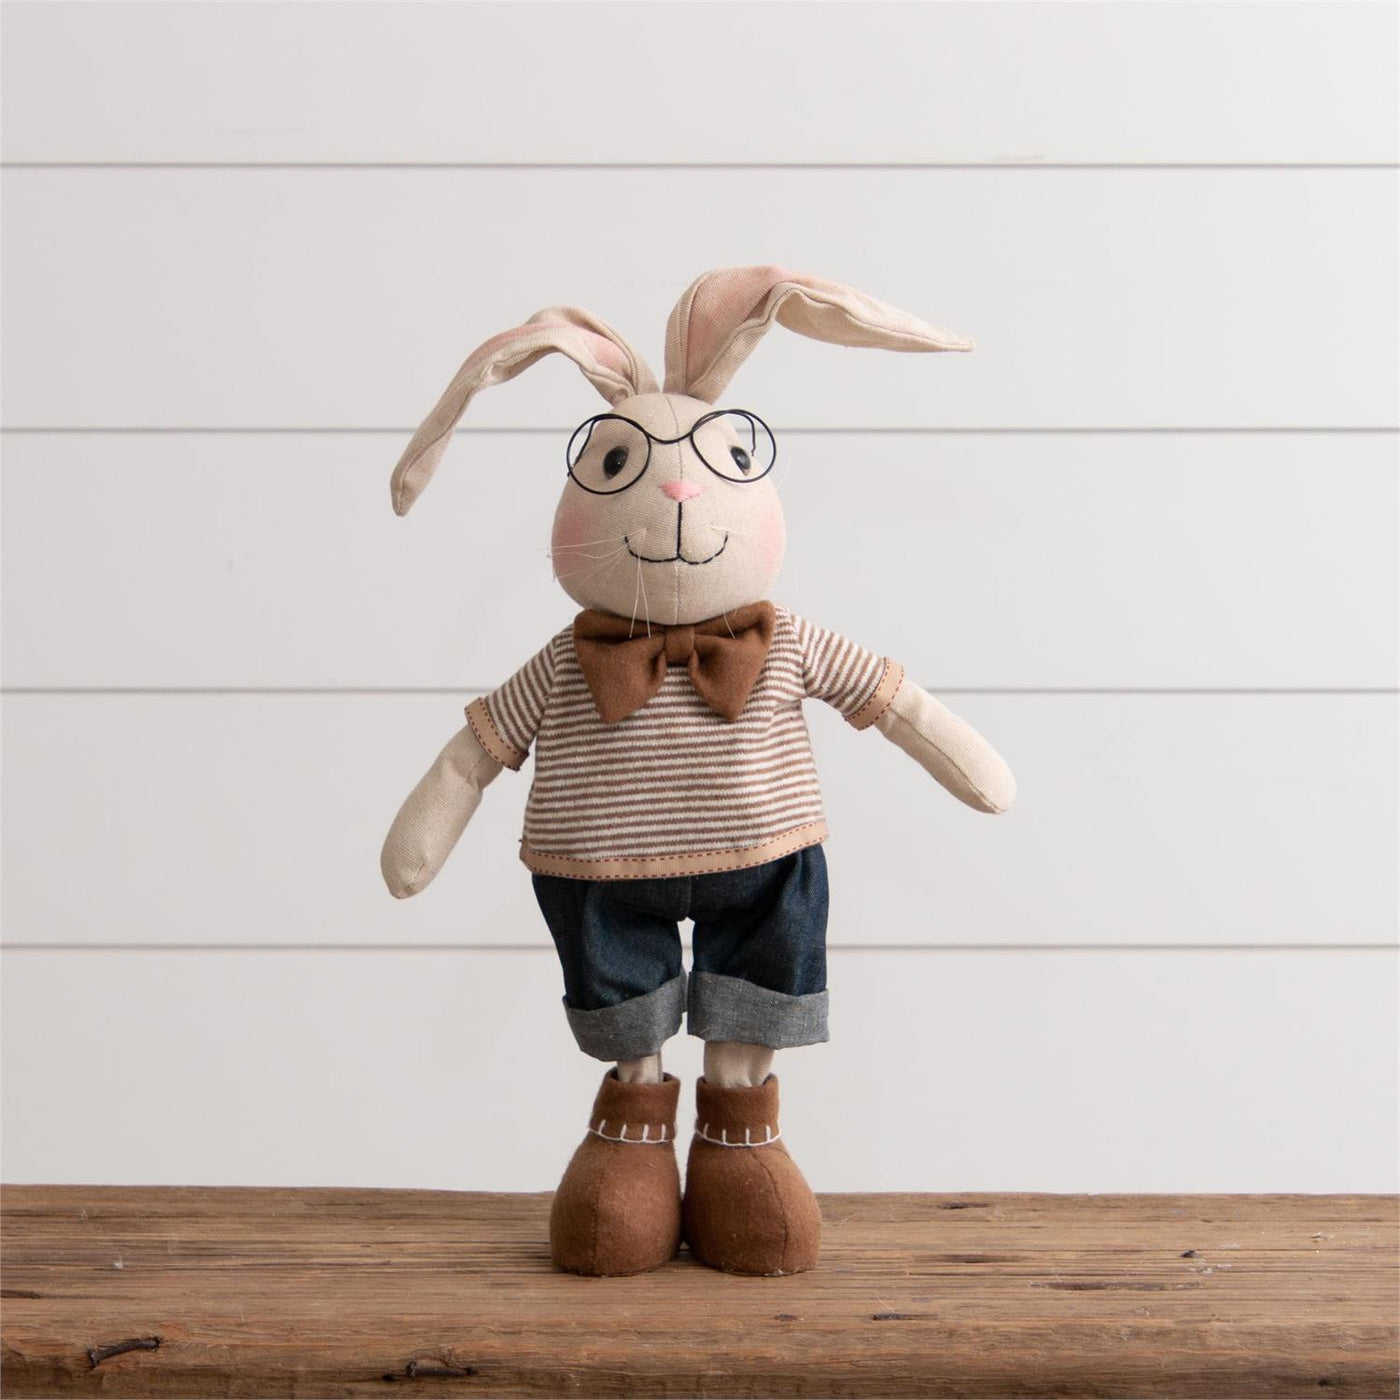 Mr Buster Rabbit Fabric Figure with Glasses 21" H